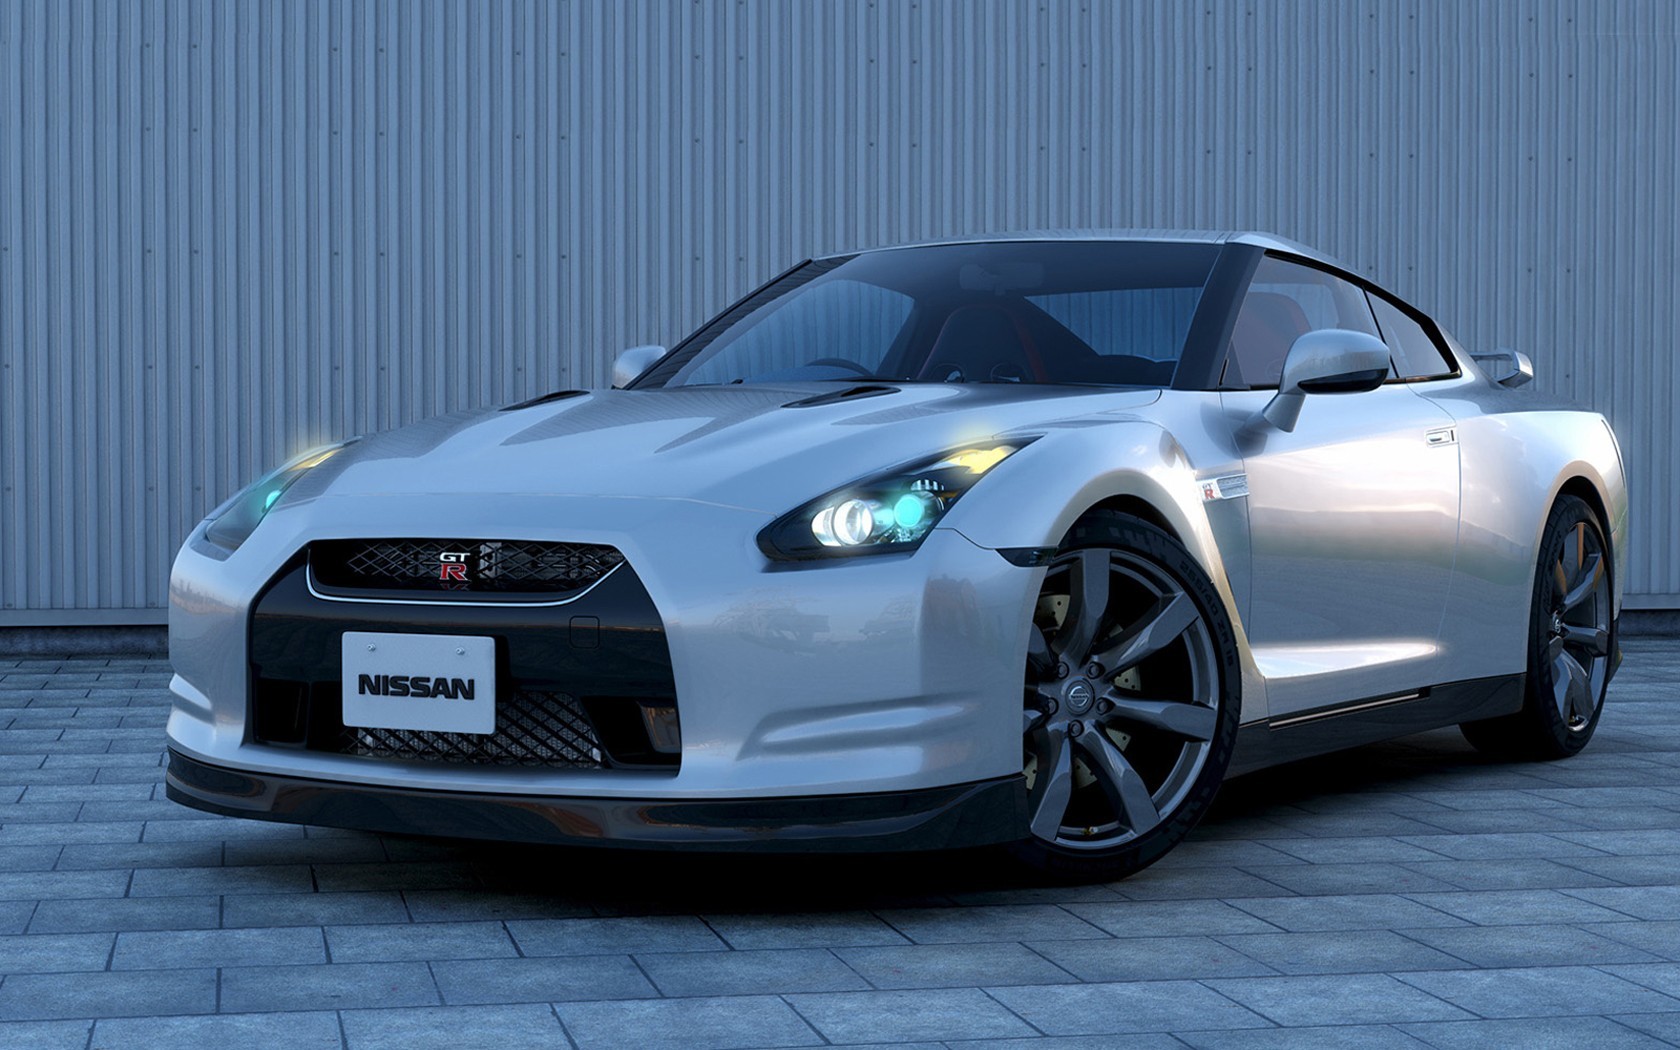 Nissan Gtr And Wallpaper For iPhone1680 X Pixels